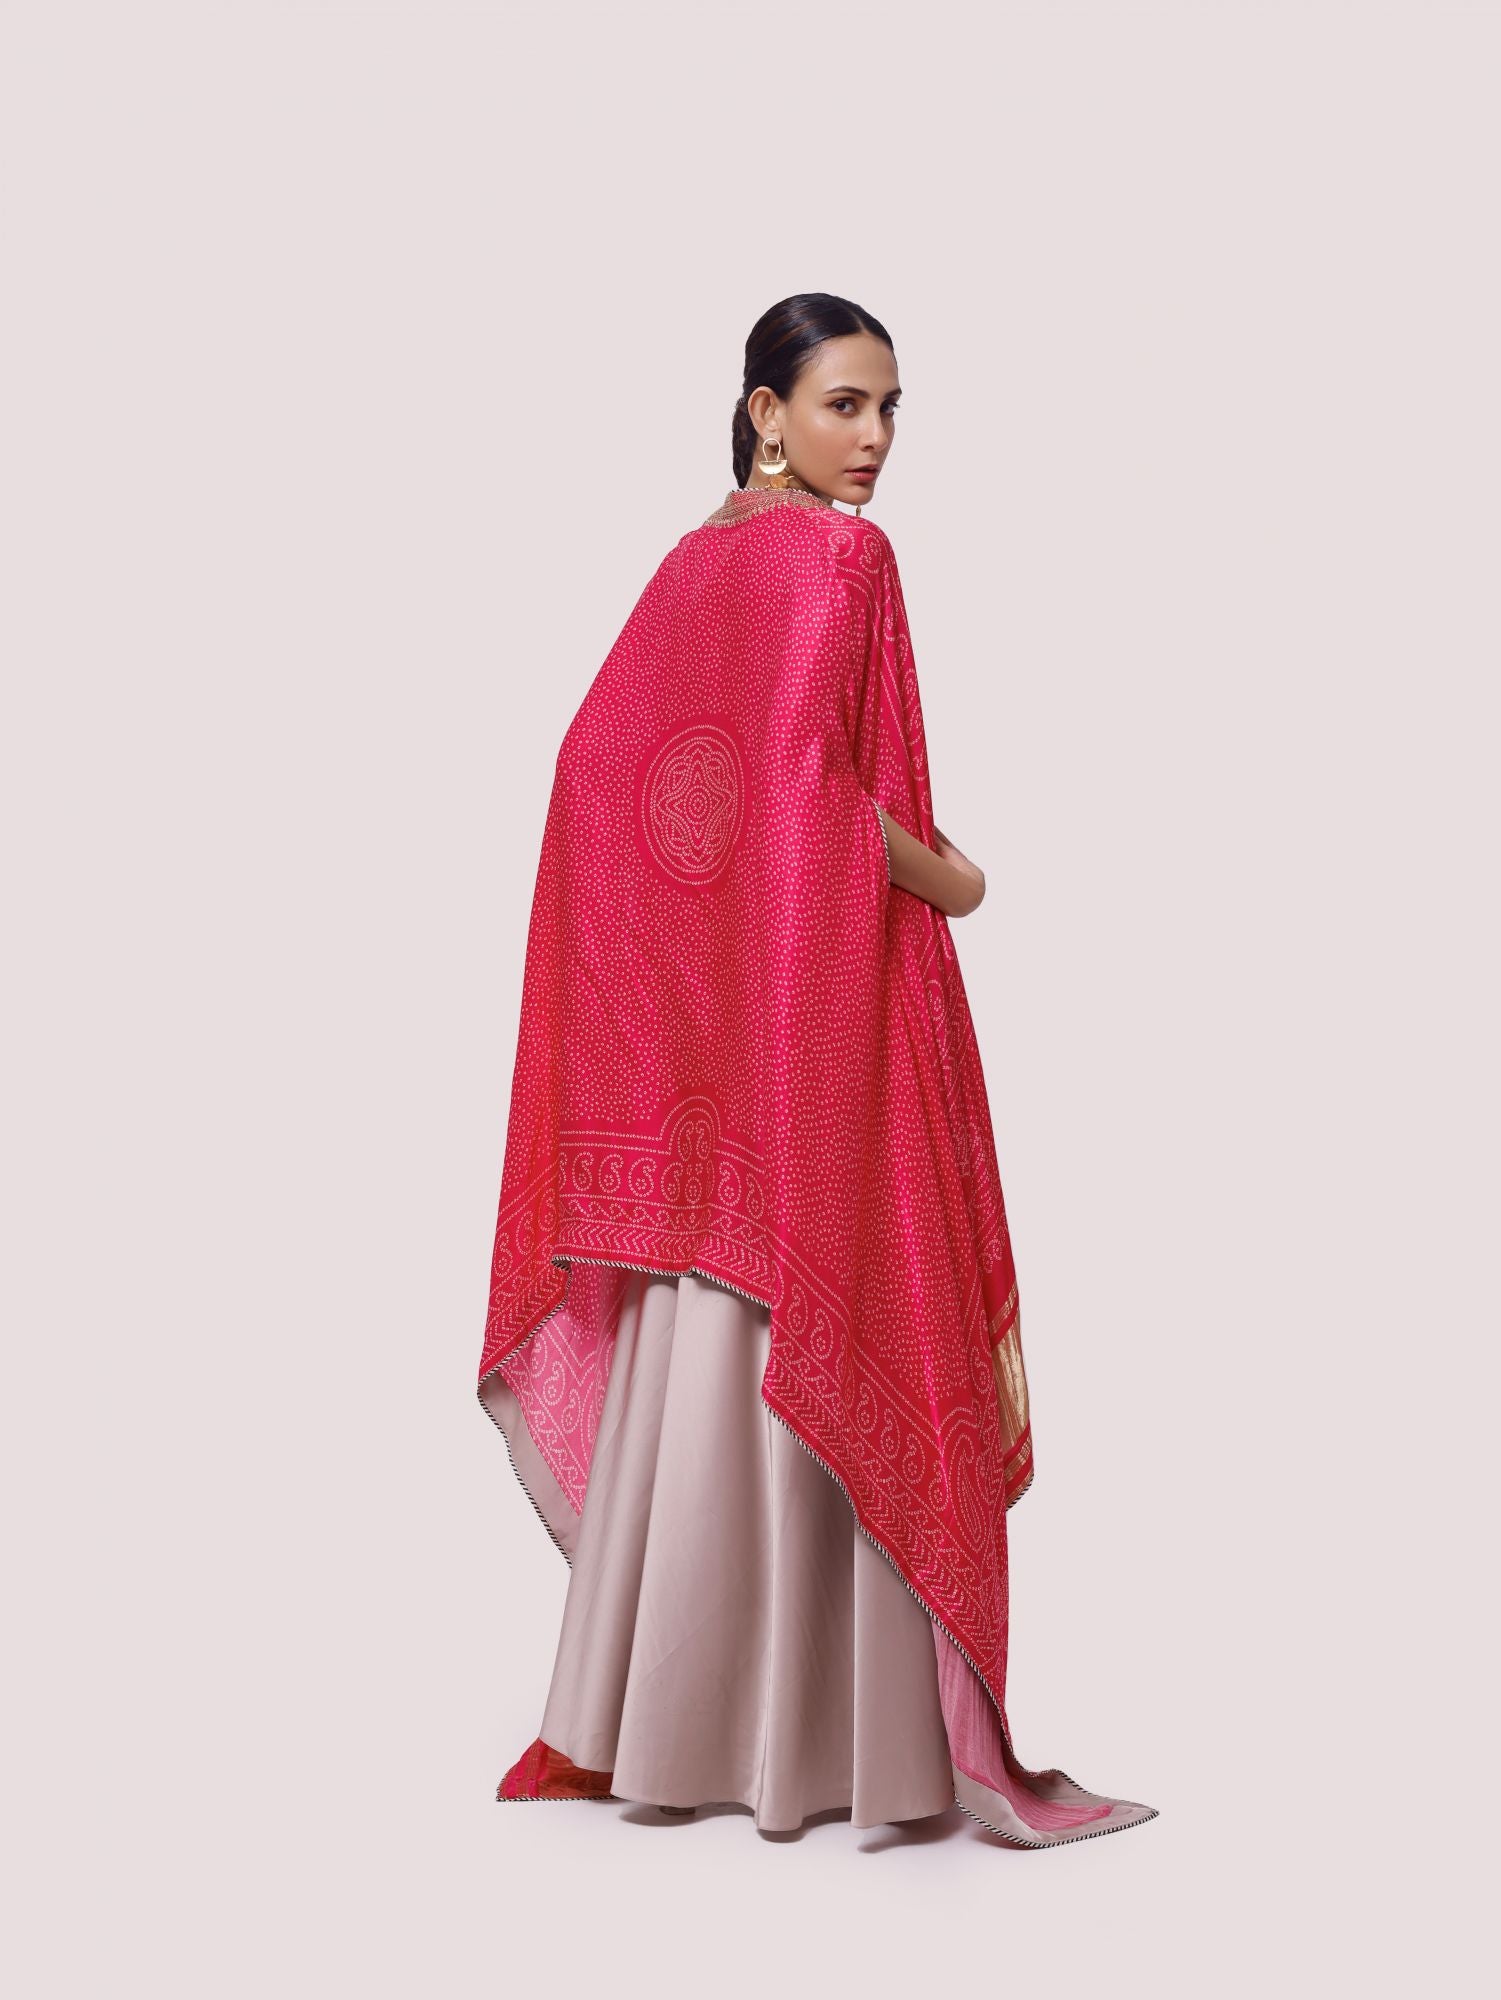 Buy beige satin maxi dress online in USA with pink embroidered cape. Shop the best and latest designs in embroidered sarees, designer sarees, Anarkali suit, lehengas, sharara suits for weddings and special occasions from Pure Elegance Indian fashion store in USA.-back